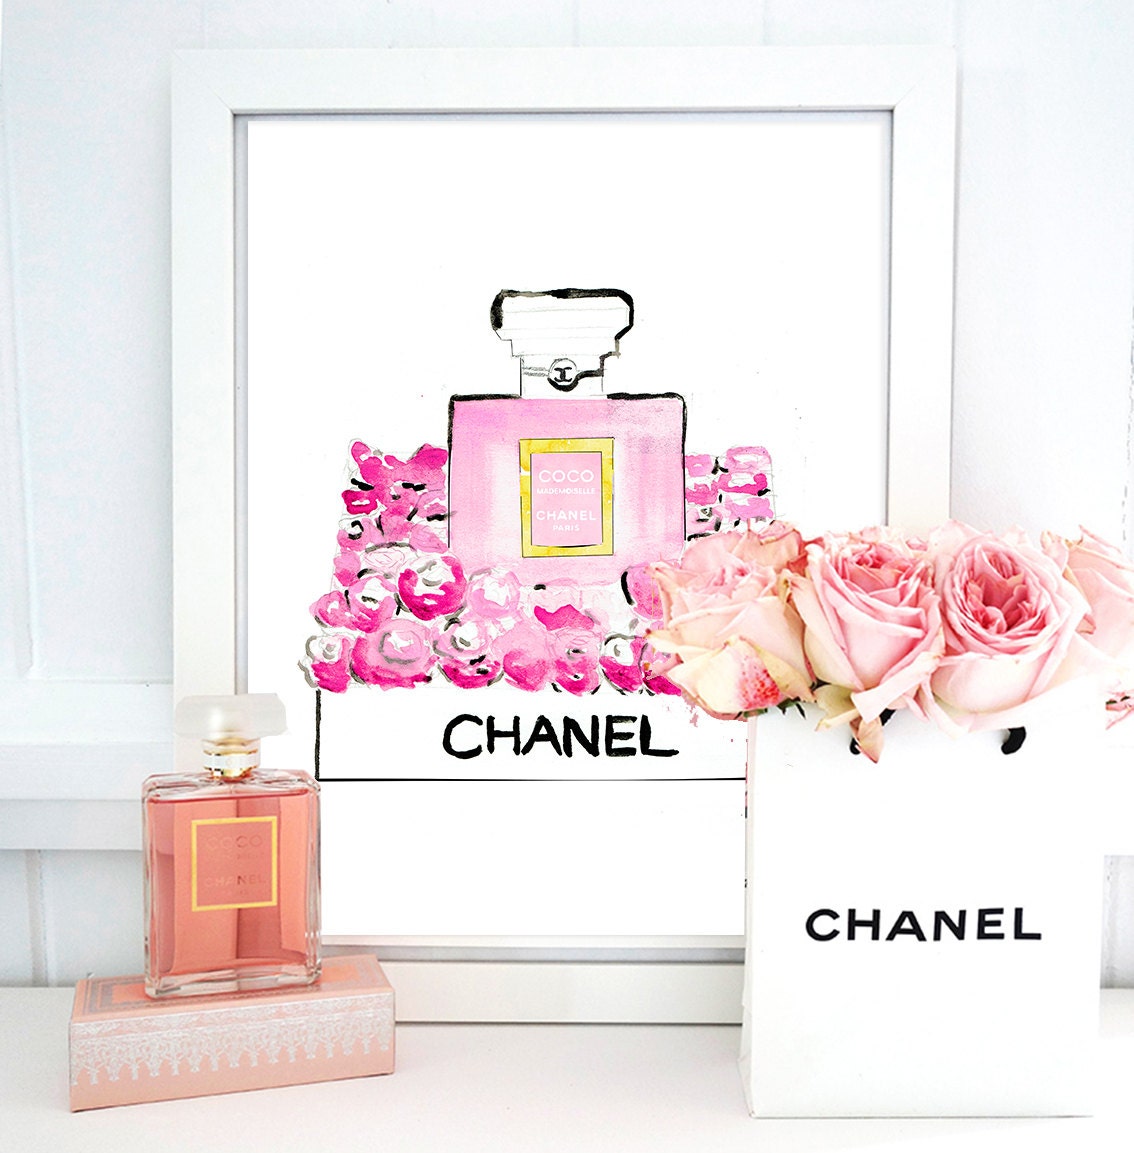 Coco Chanel Mademoiselle Perfume and Roses. by CouturePrintery